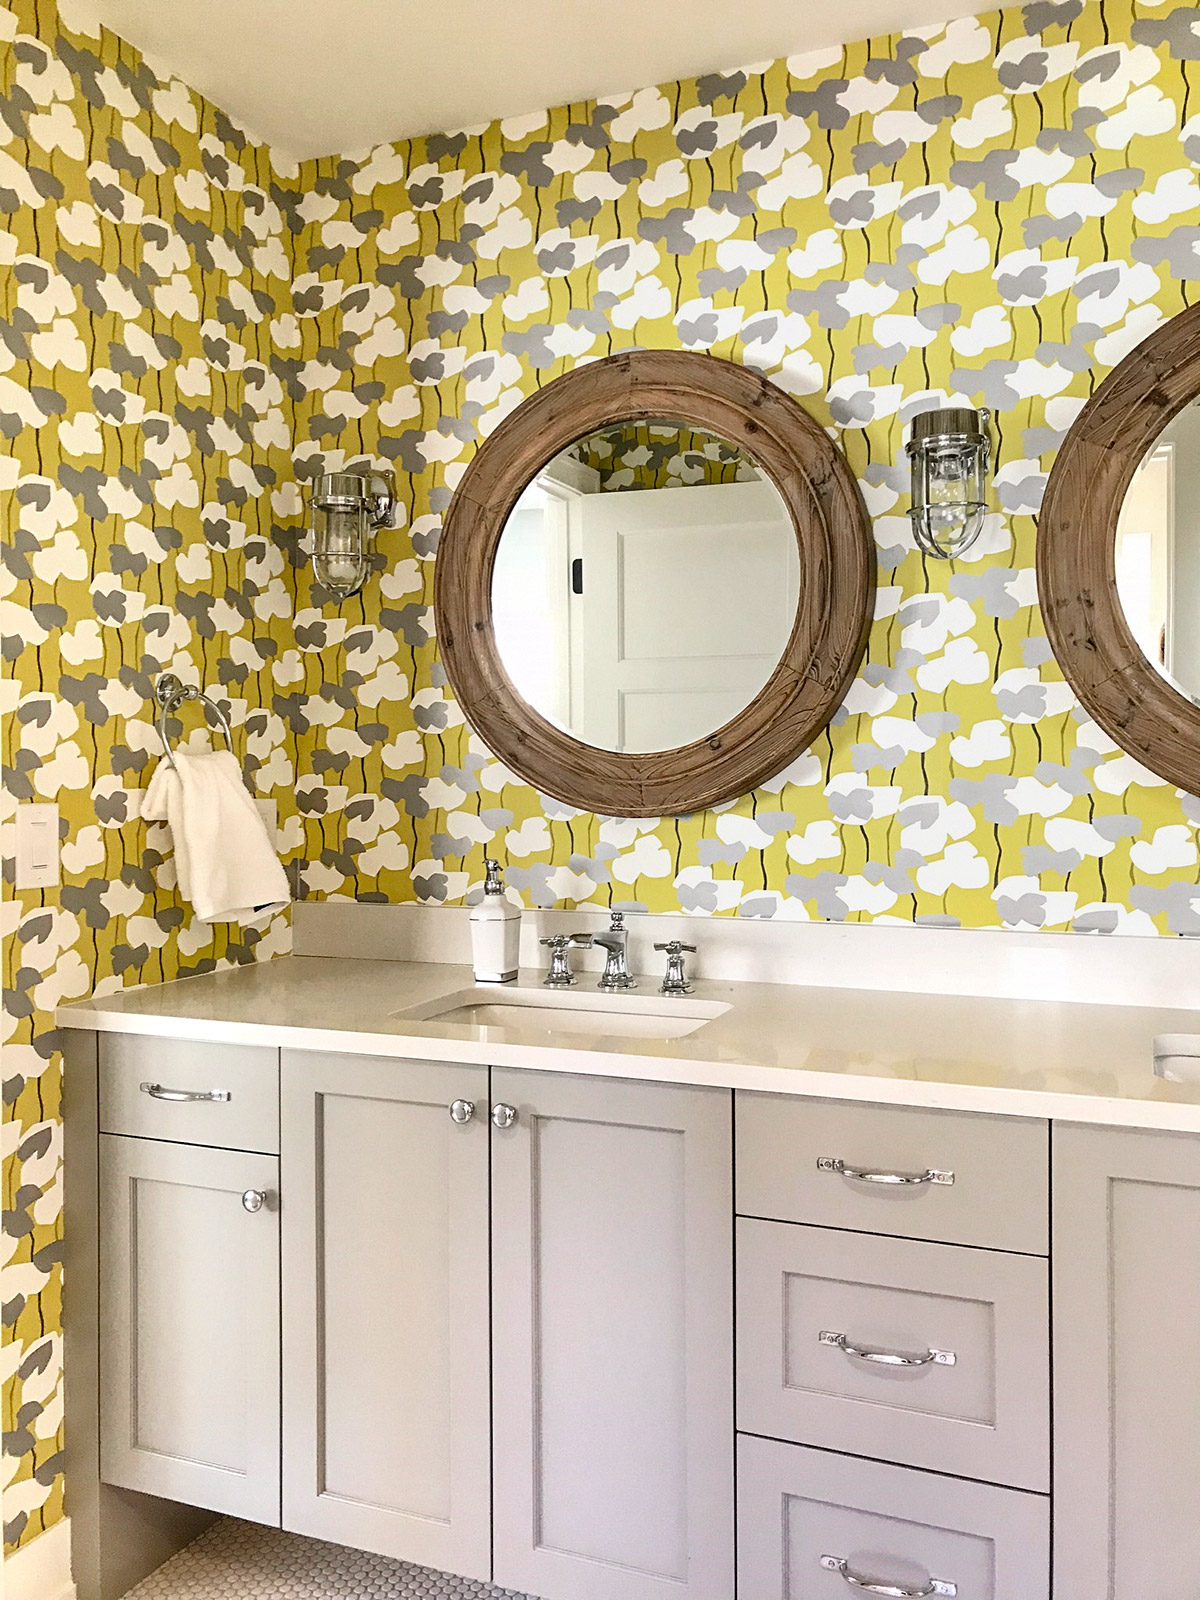 Bathroom With Bold Floral Wallpaper And Gray Vanity - Bathroom ...